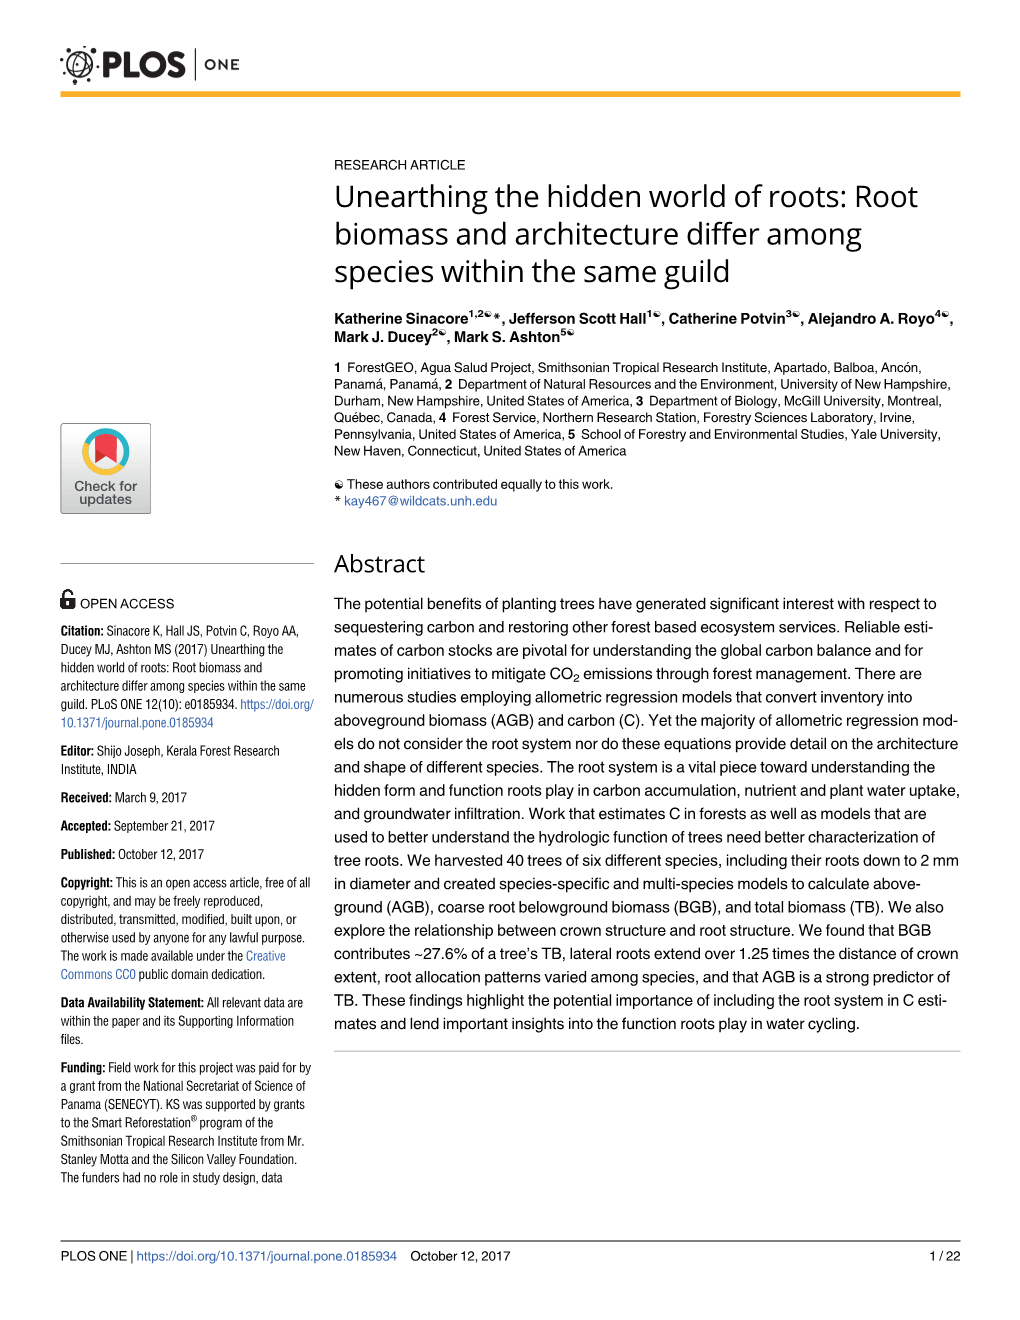 Unearthing the Hidden World of Roots: Root Biomass and Architecture Differ Among Species Within the Same Guild